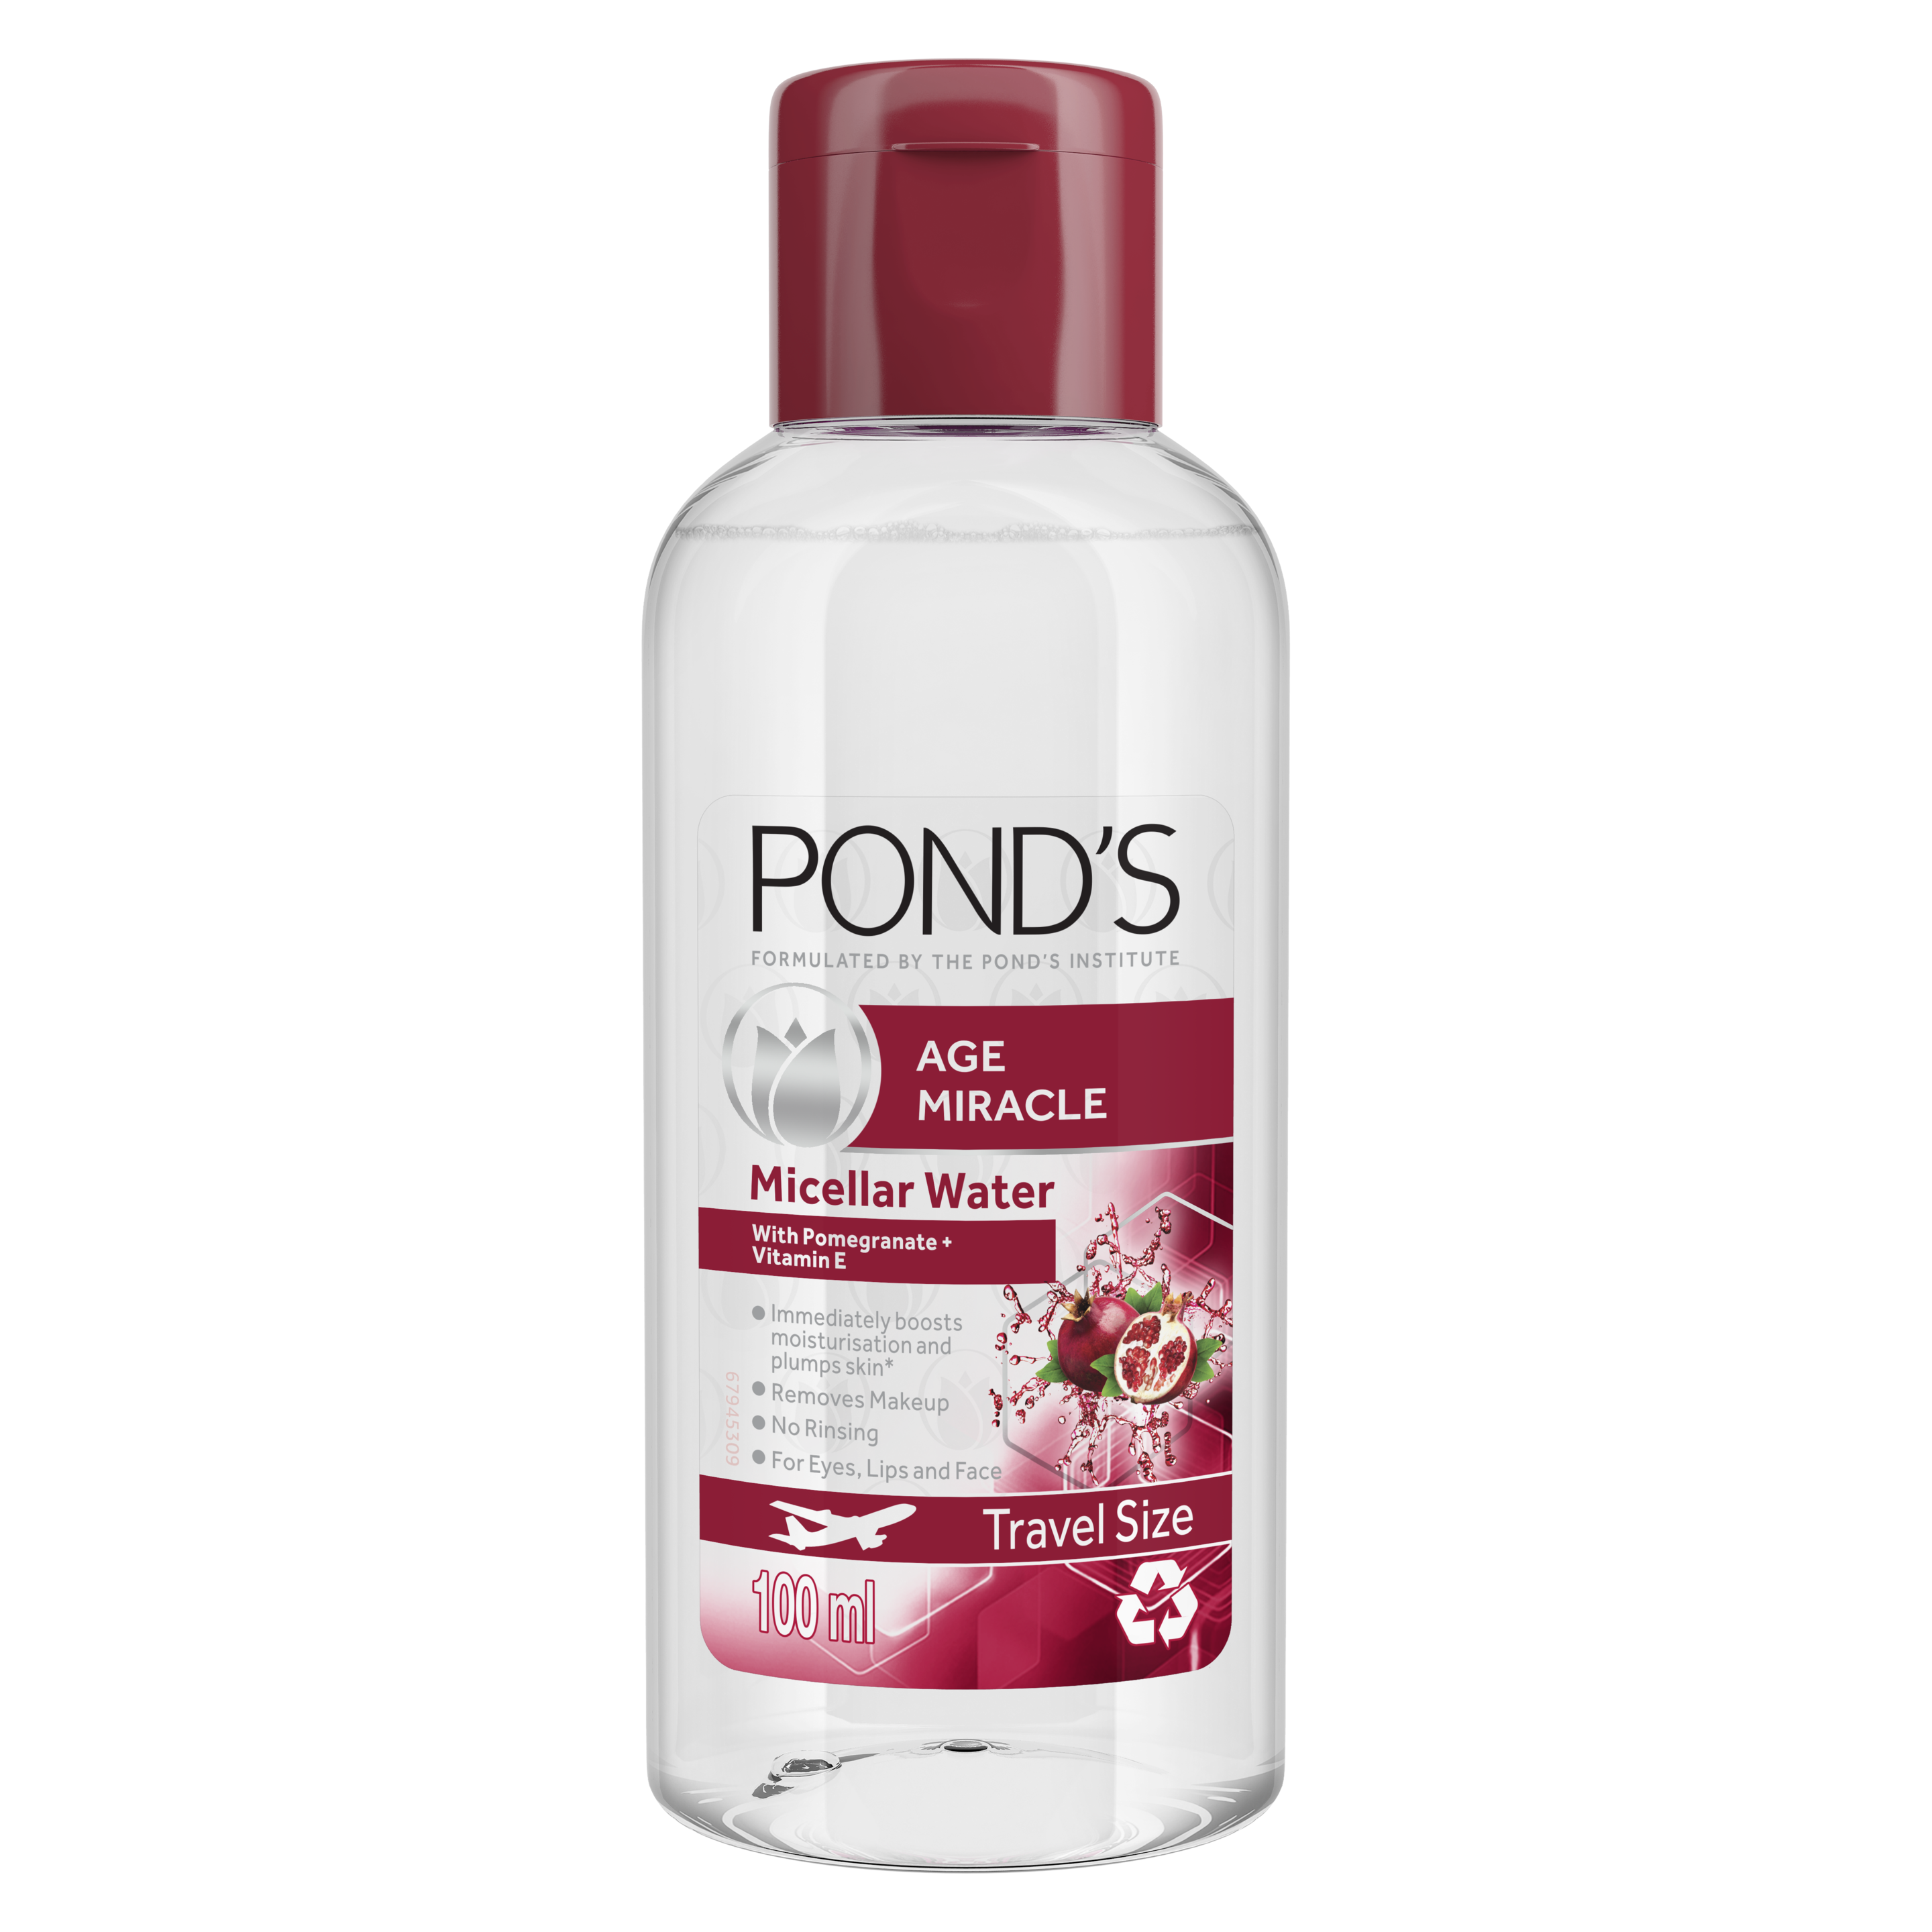 POND'S Age Miracle Micellar Water 100ml